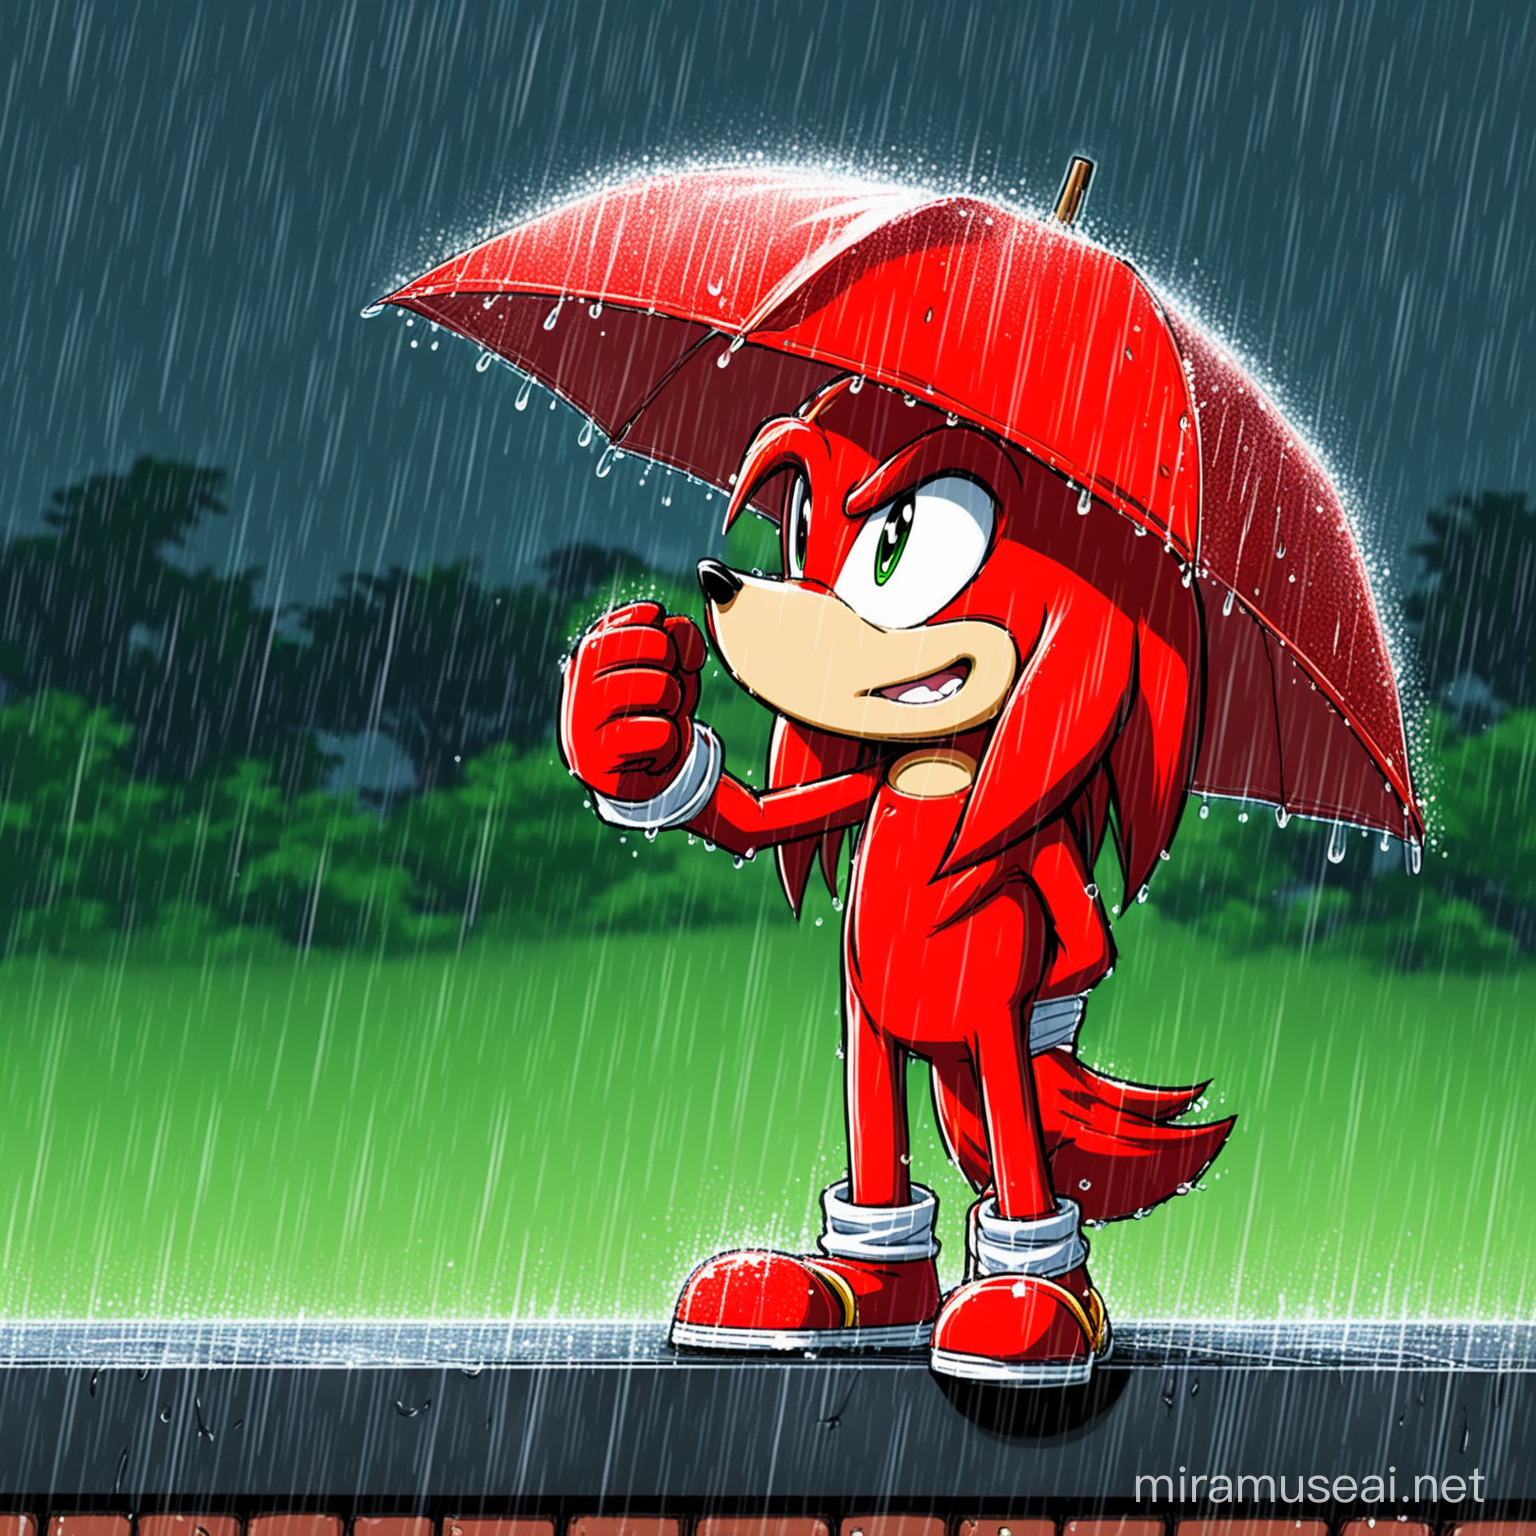 When Knuckles was tired of worrying
it's raining all around